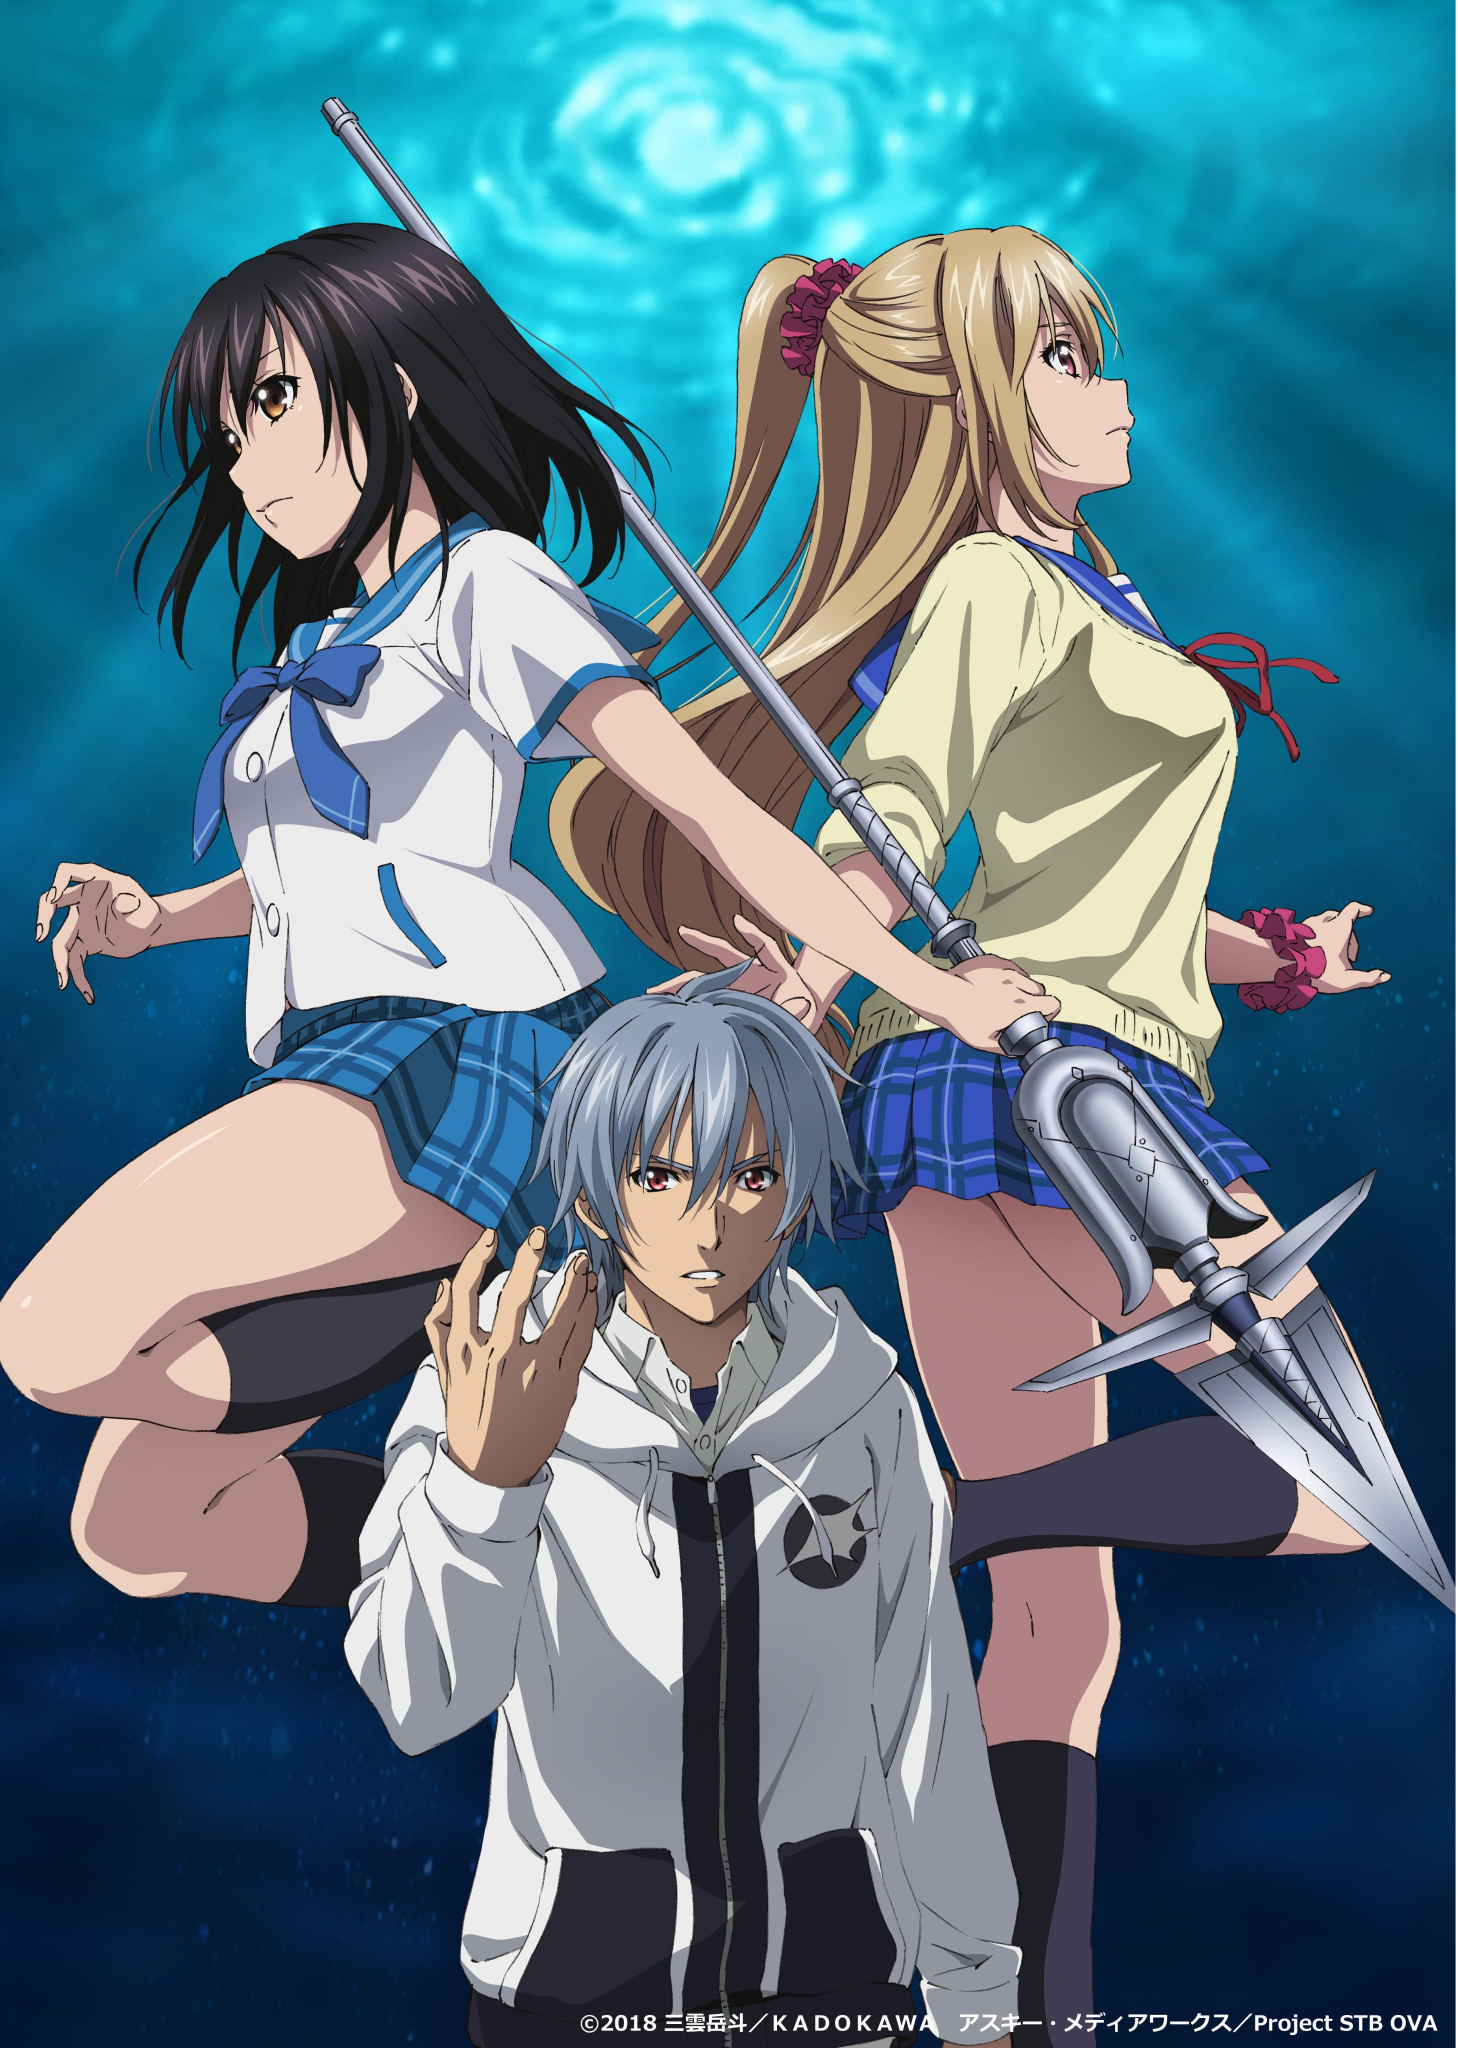 ANIME TUESDAY: Strike The Blood - From the Warlord's Empire I Review